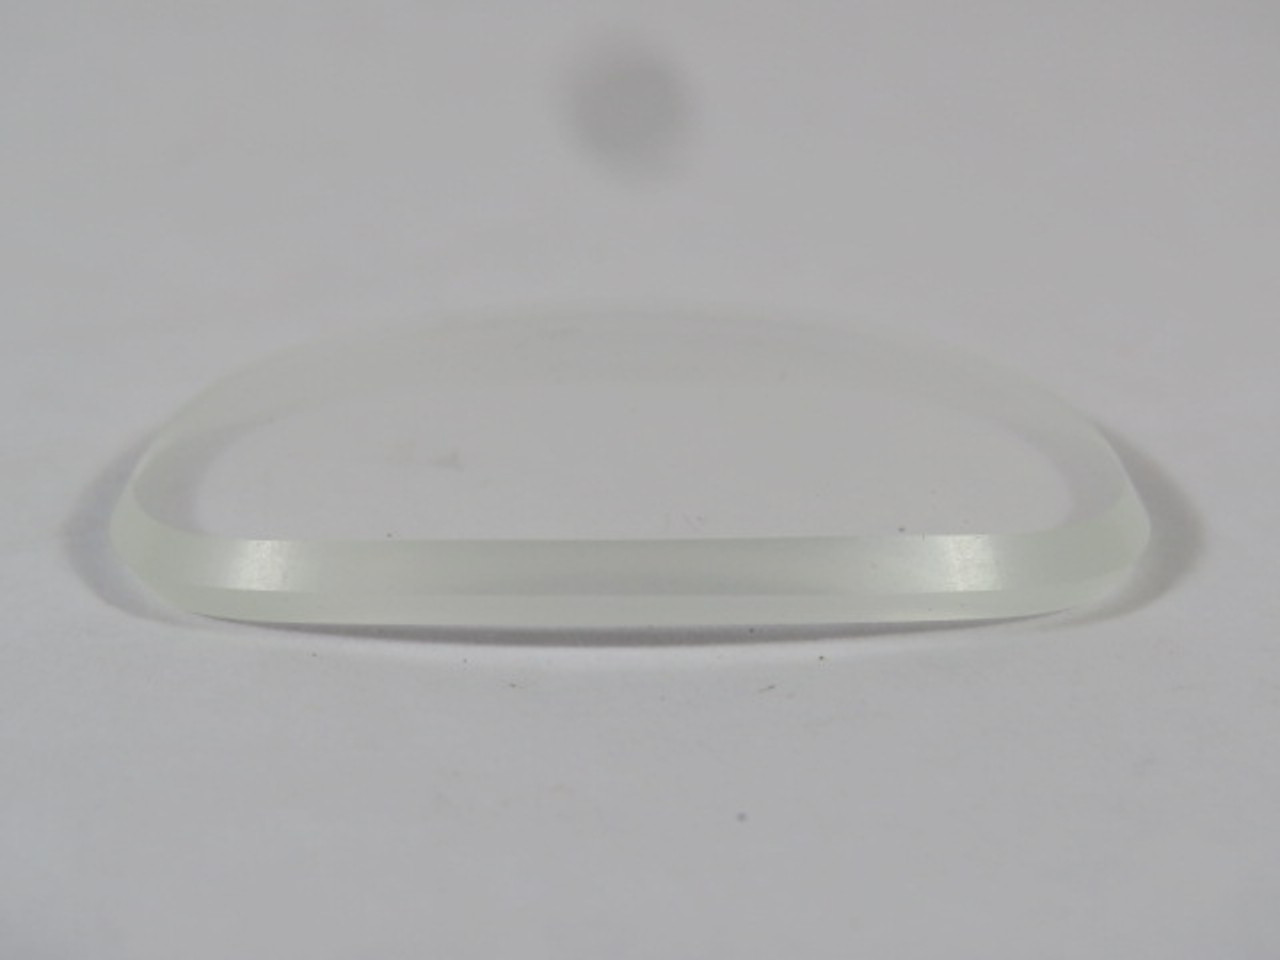 Safeway 11003 Safety Lenses Clear 48mm ! NEW !